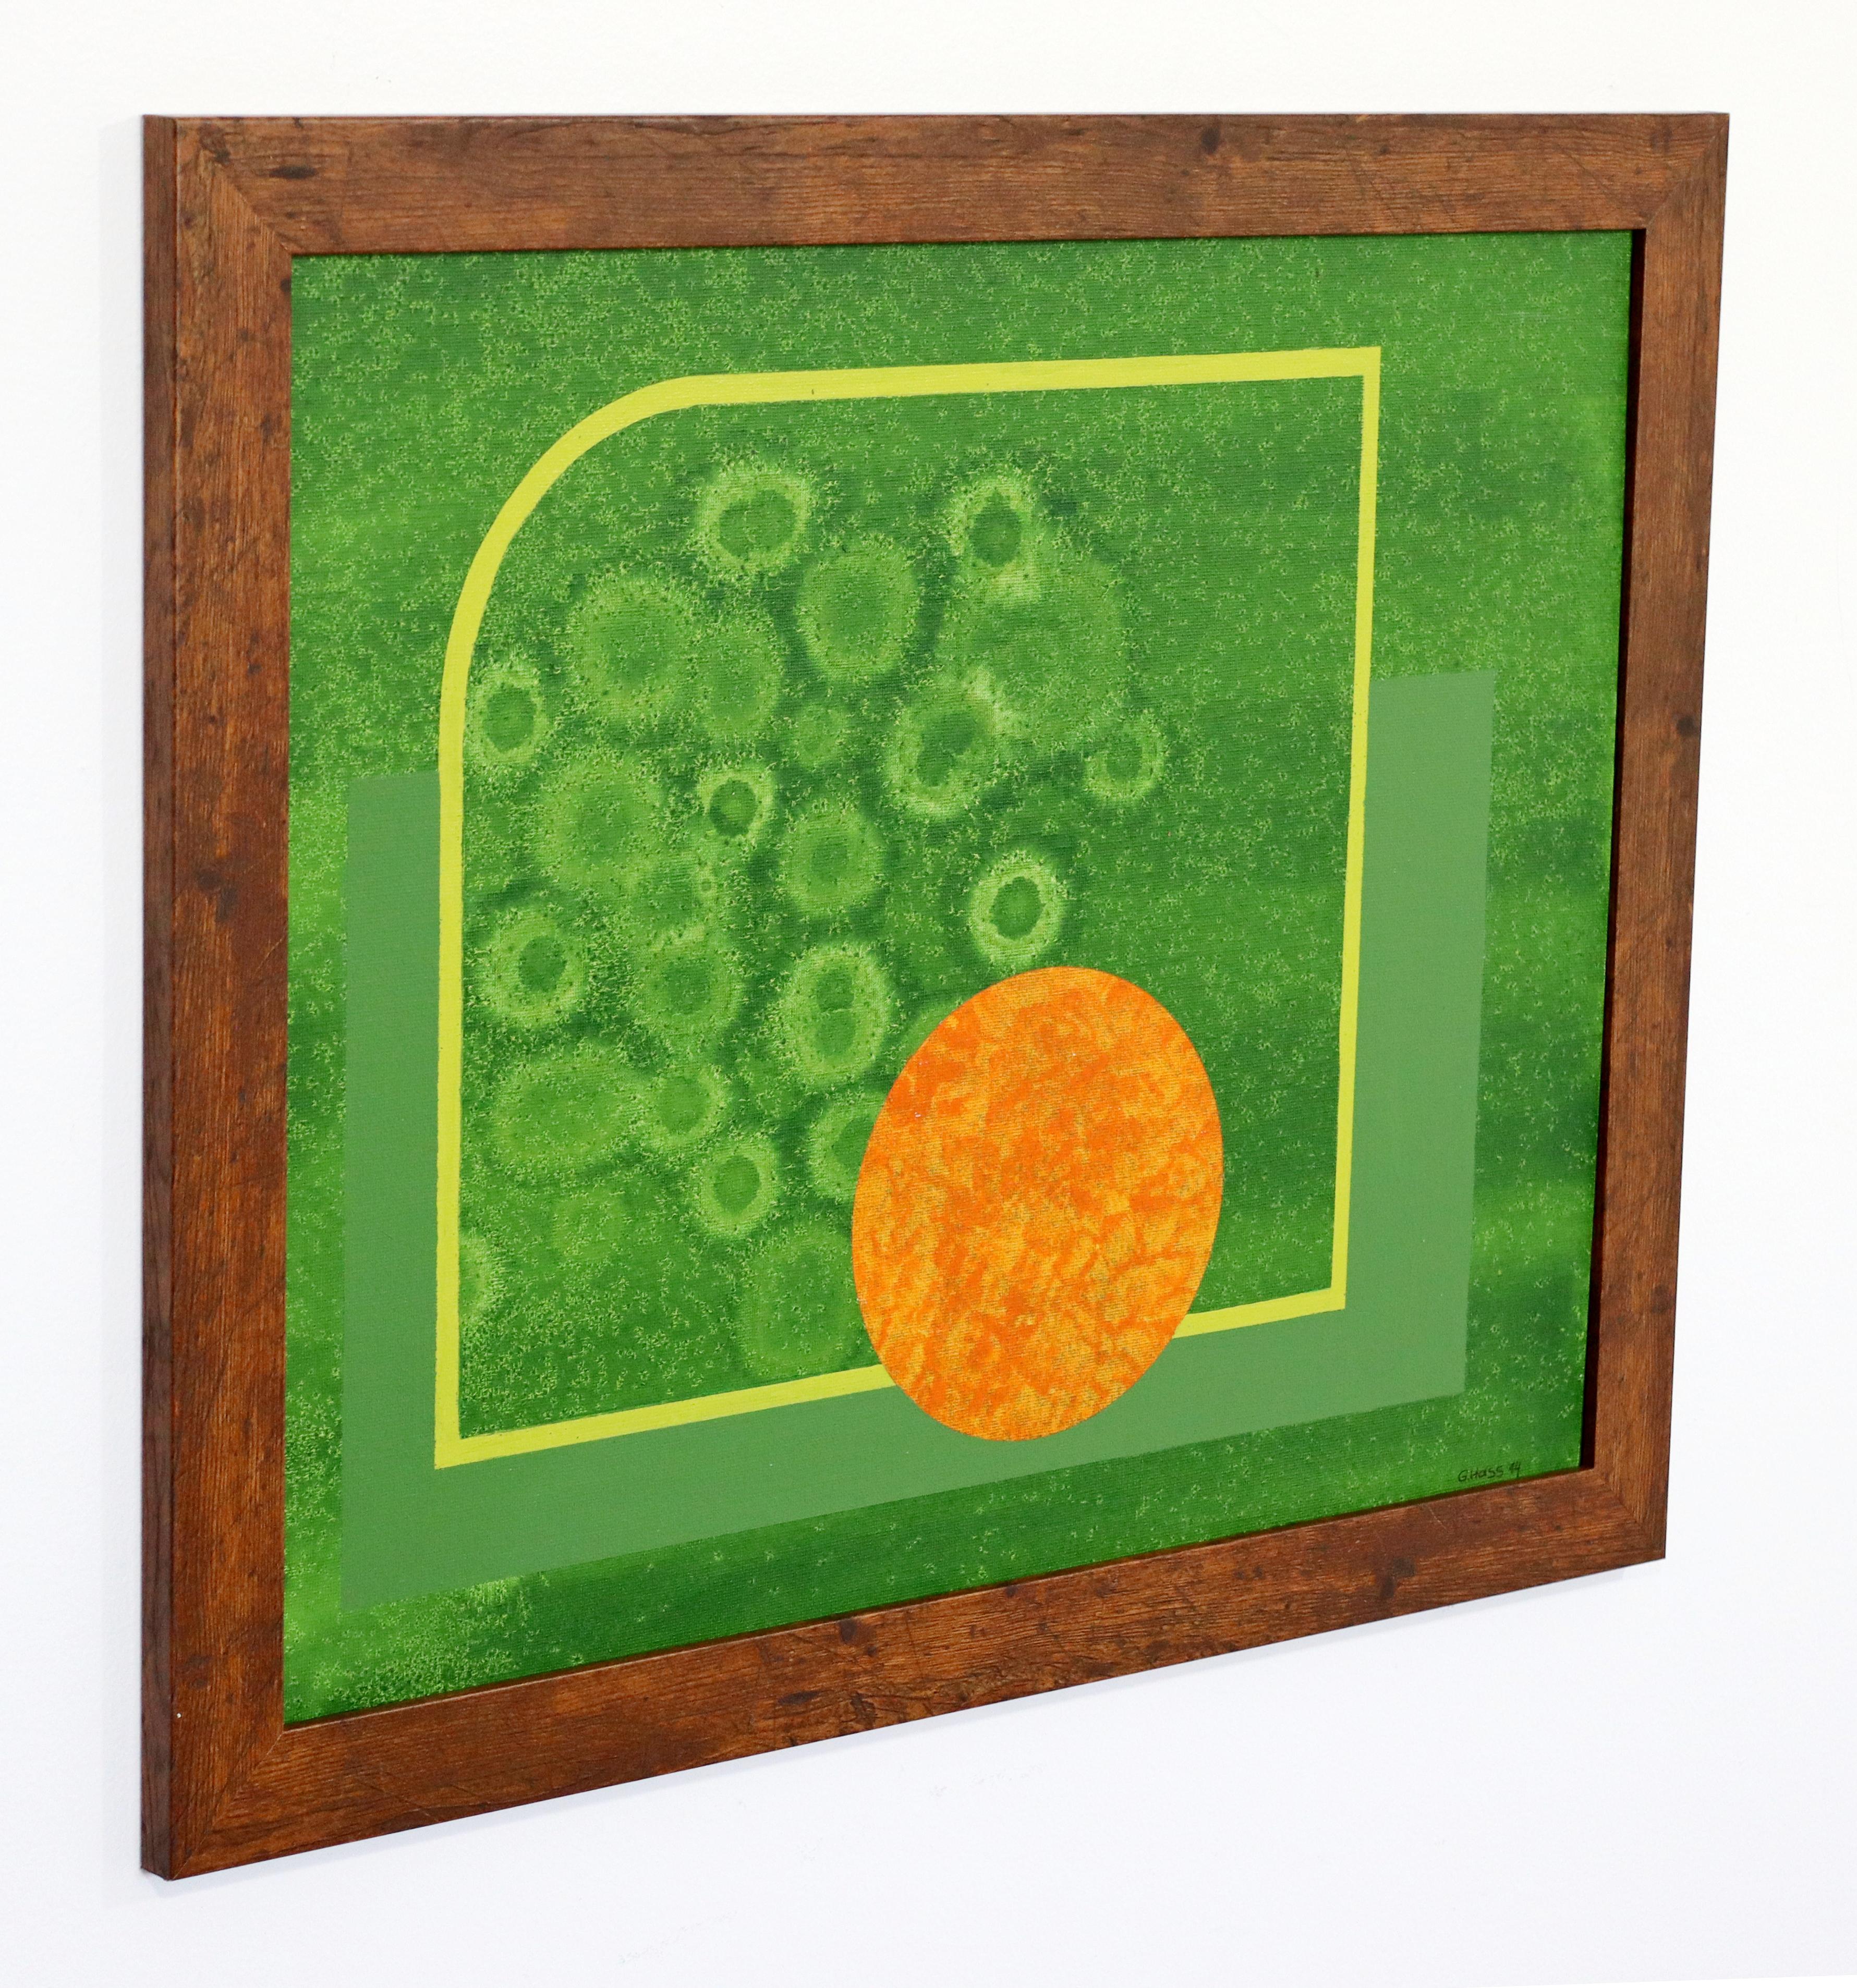 For your consideration is a gorgeous, framed, geometric painting on board, signed by Gunda Hass, dated 2014. In excellent condition. The dimensions are 18